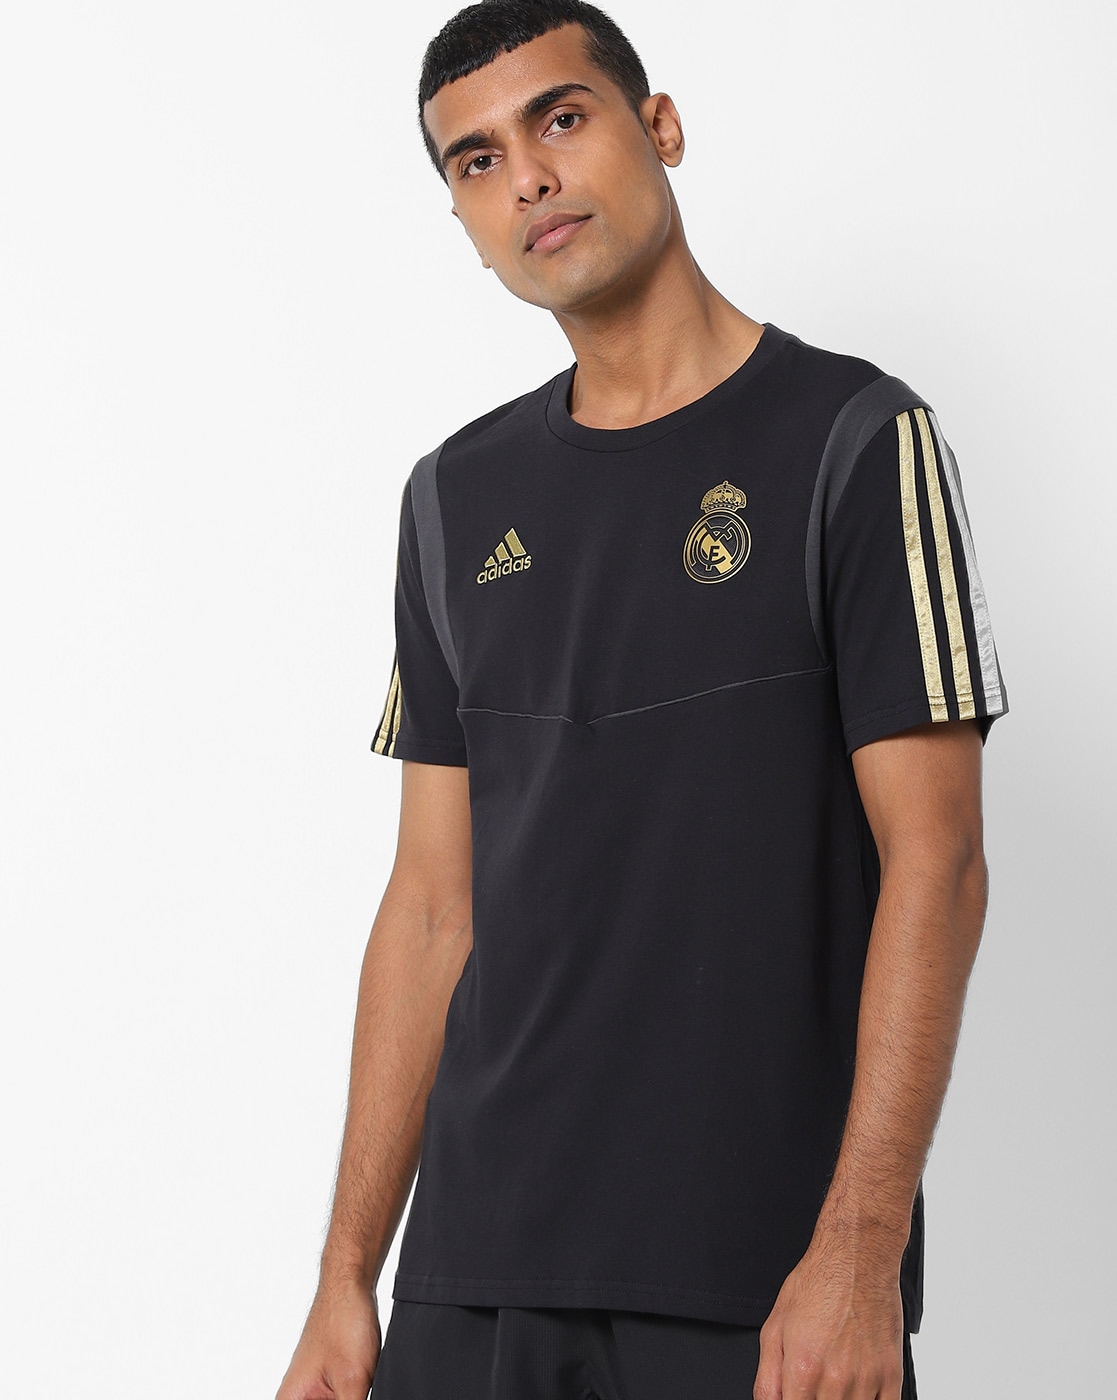 Tshirts for by ADIDAS Online |